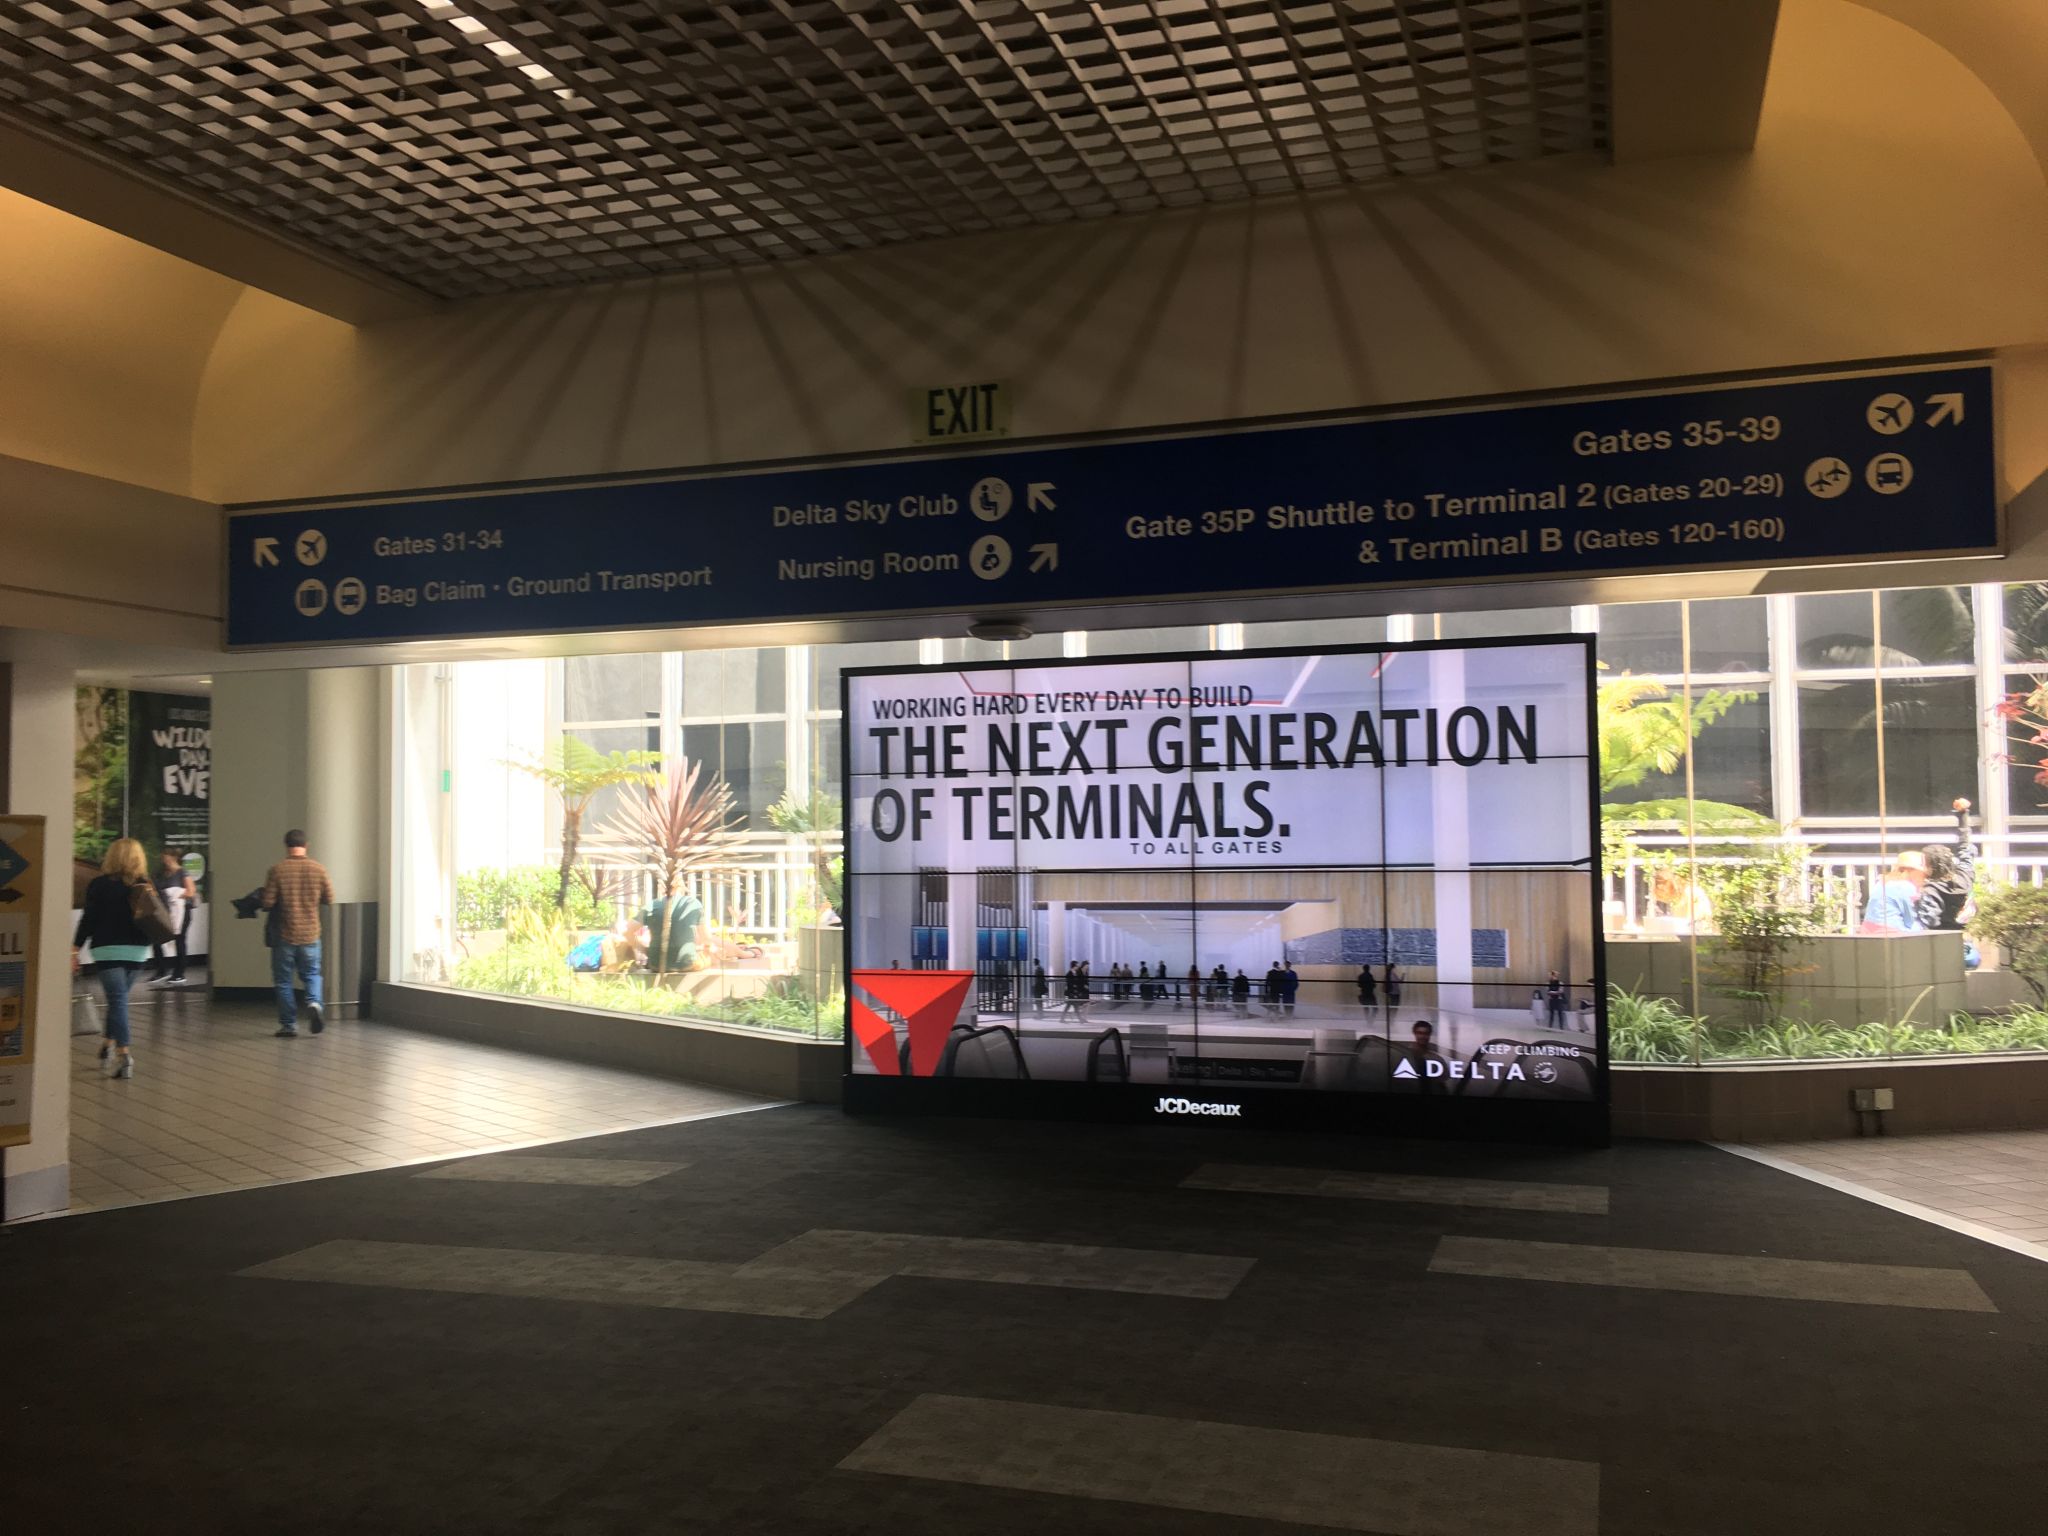 JCDecaux's Westfield Vision